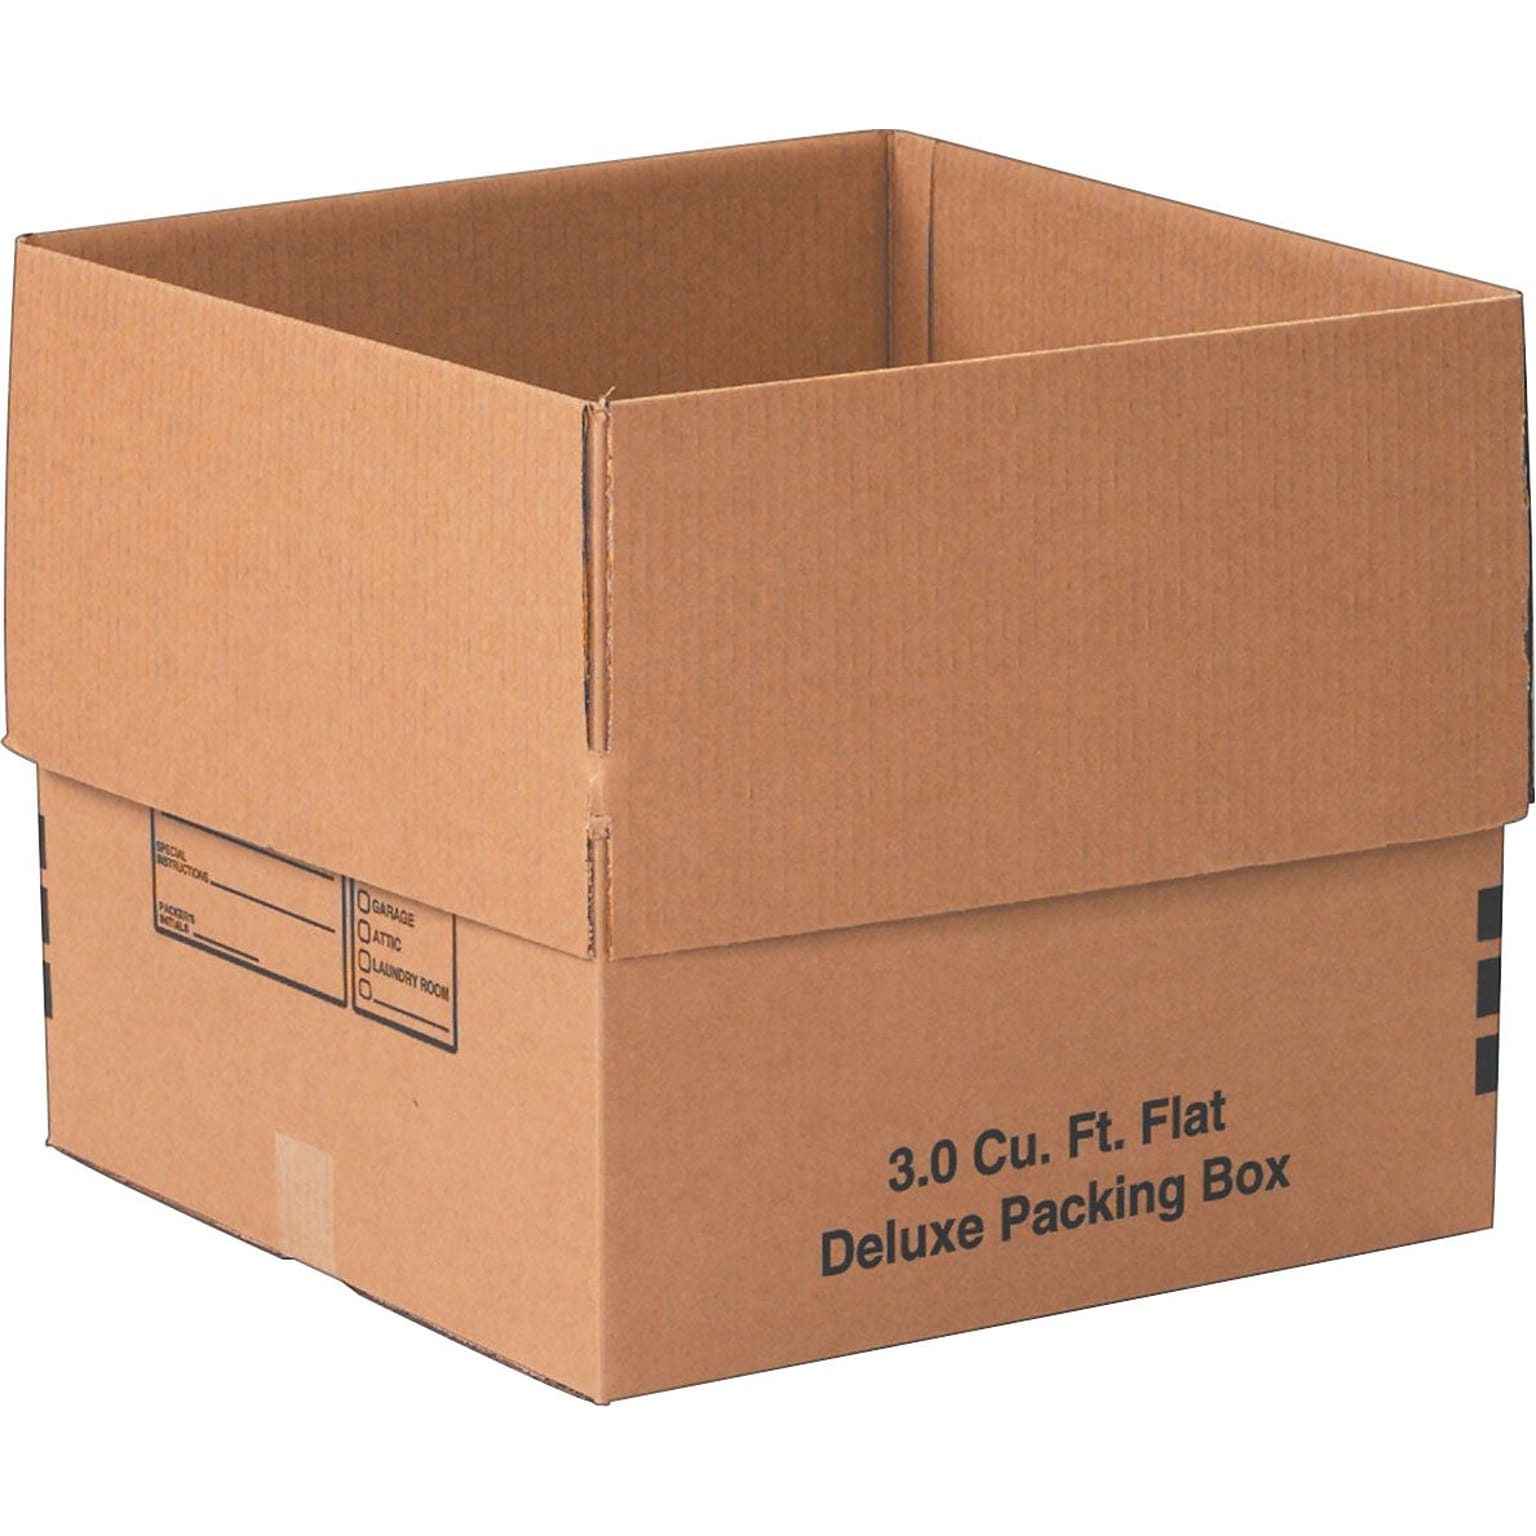 18 x 18 x 16 Deluxe Moving Boxes, 32 ECT, Brown, 20/Bundle (181816DPB)